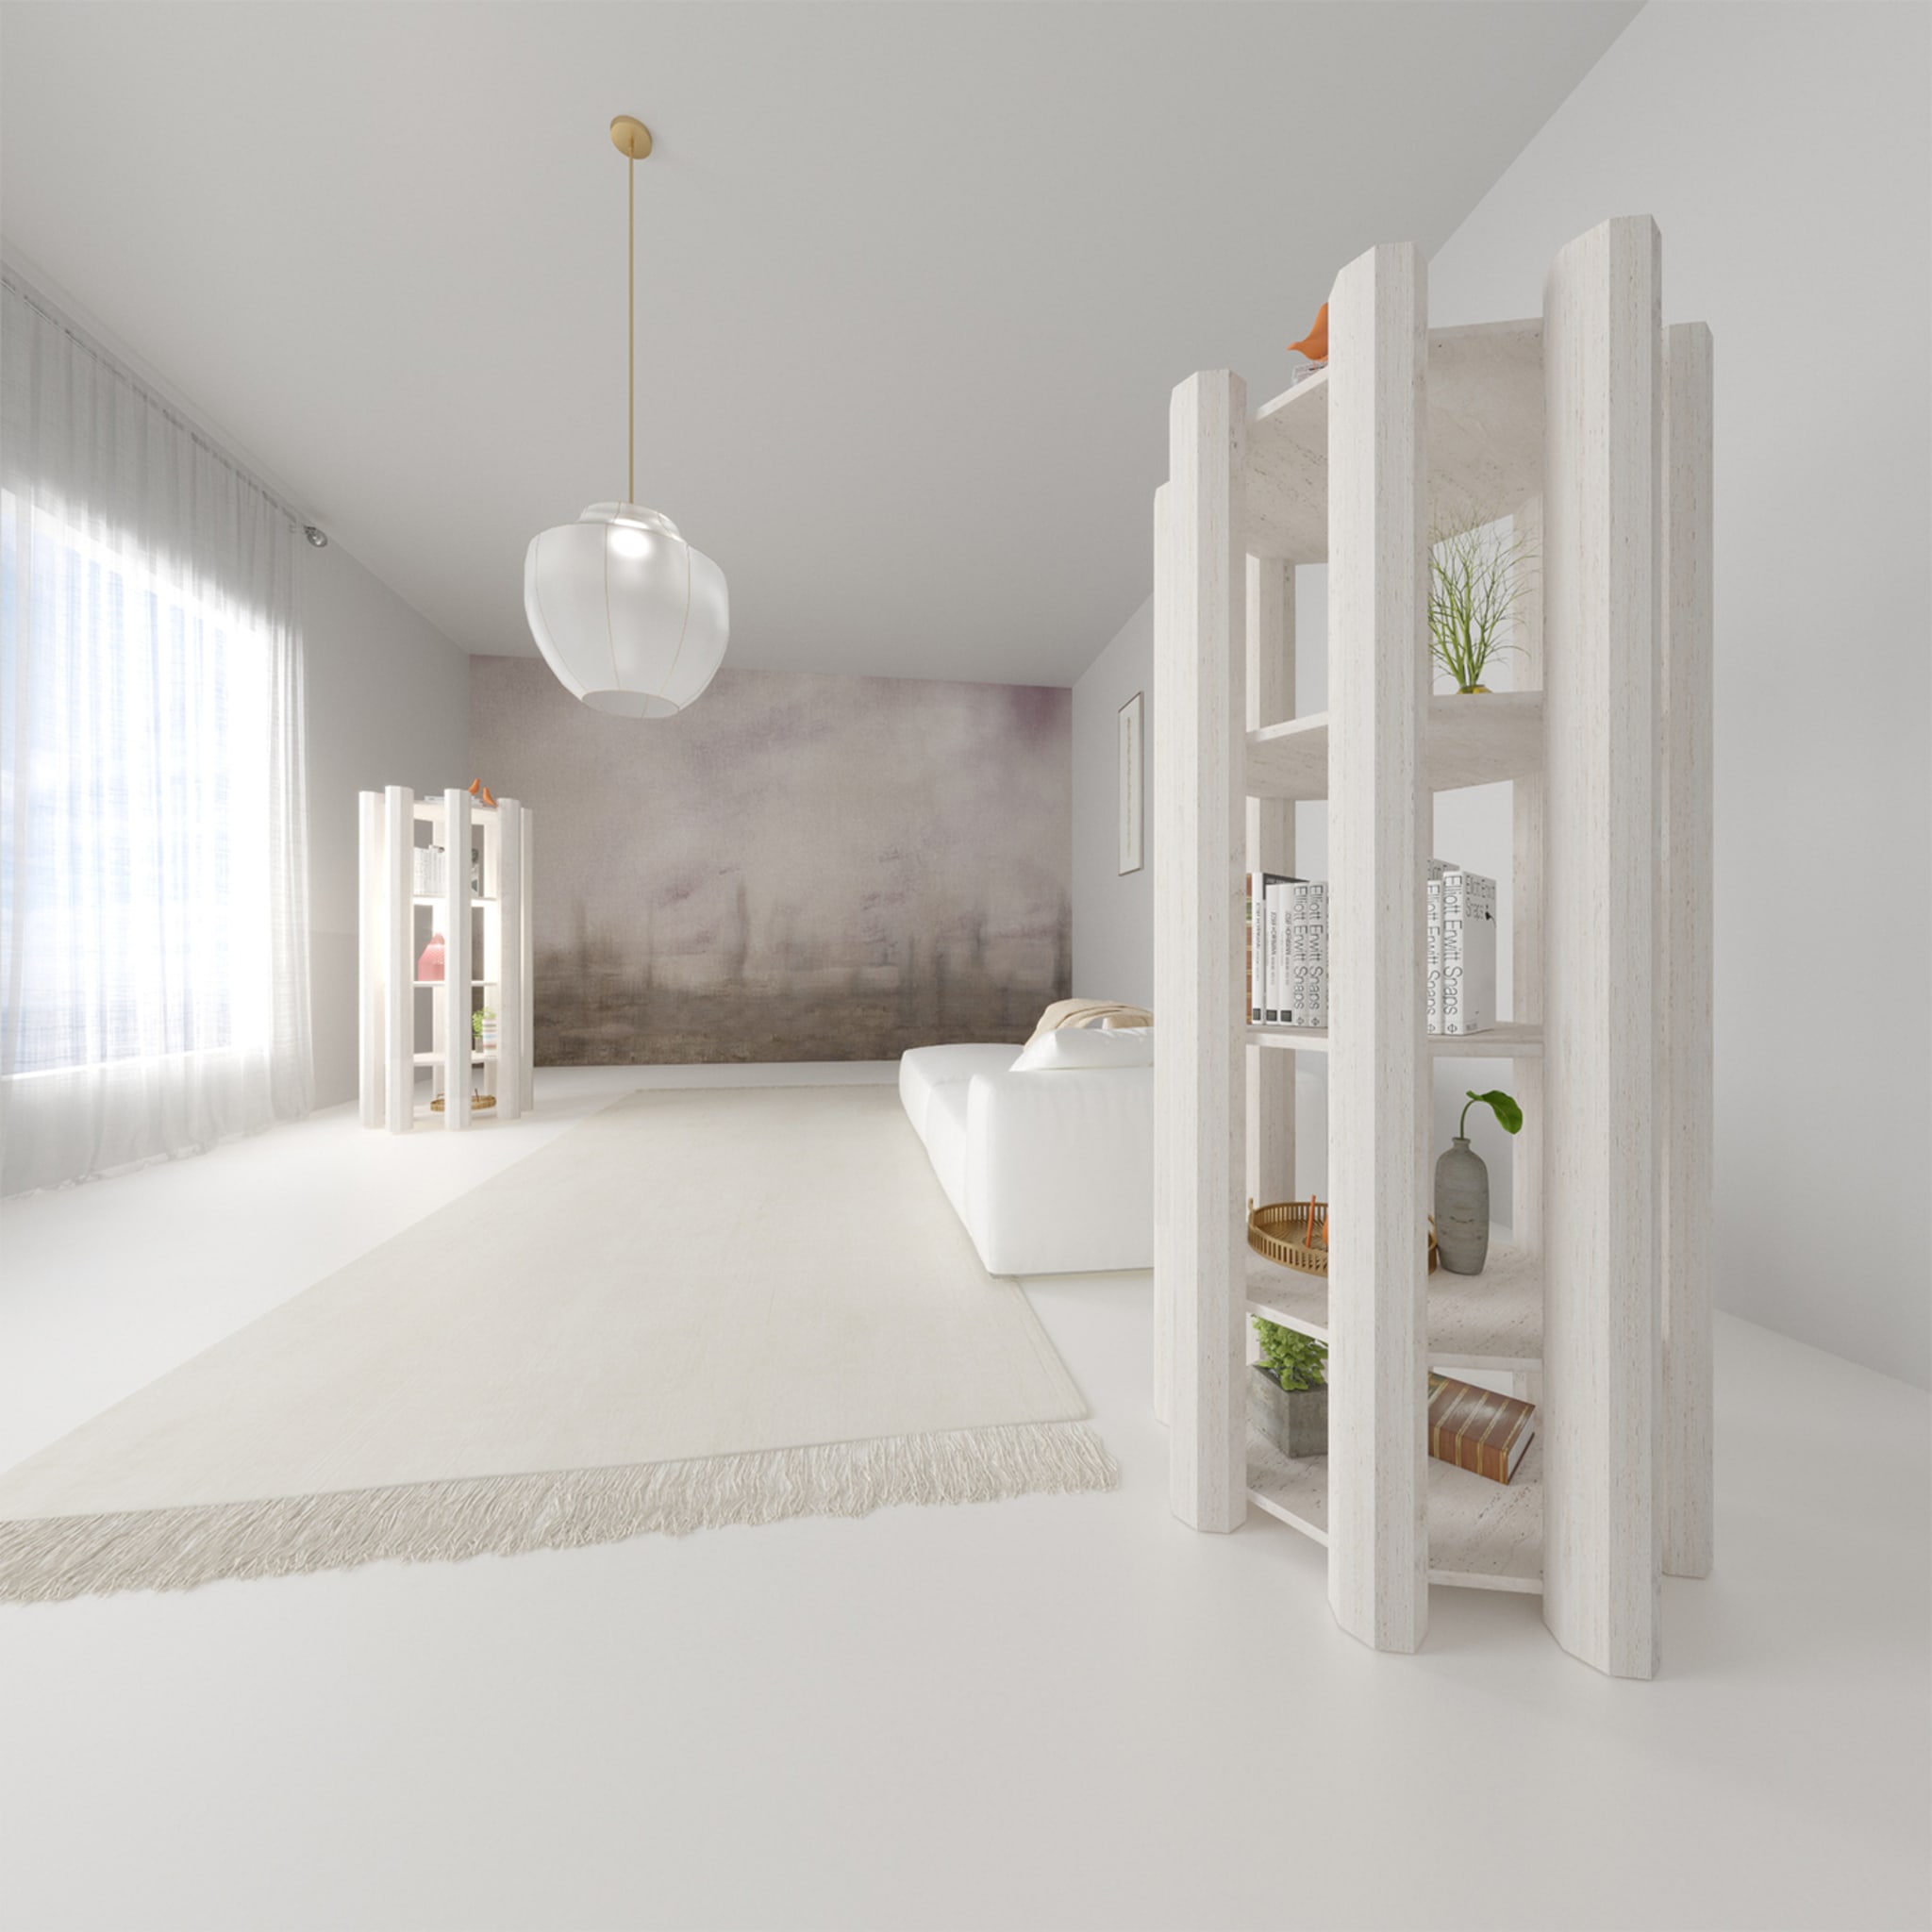 Federico Bookcase in White Marble By Sissy Daniele - Alternative view 4